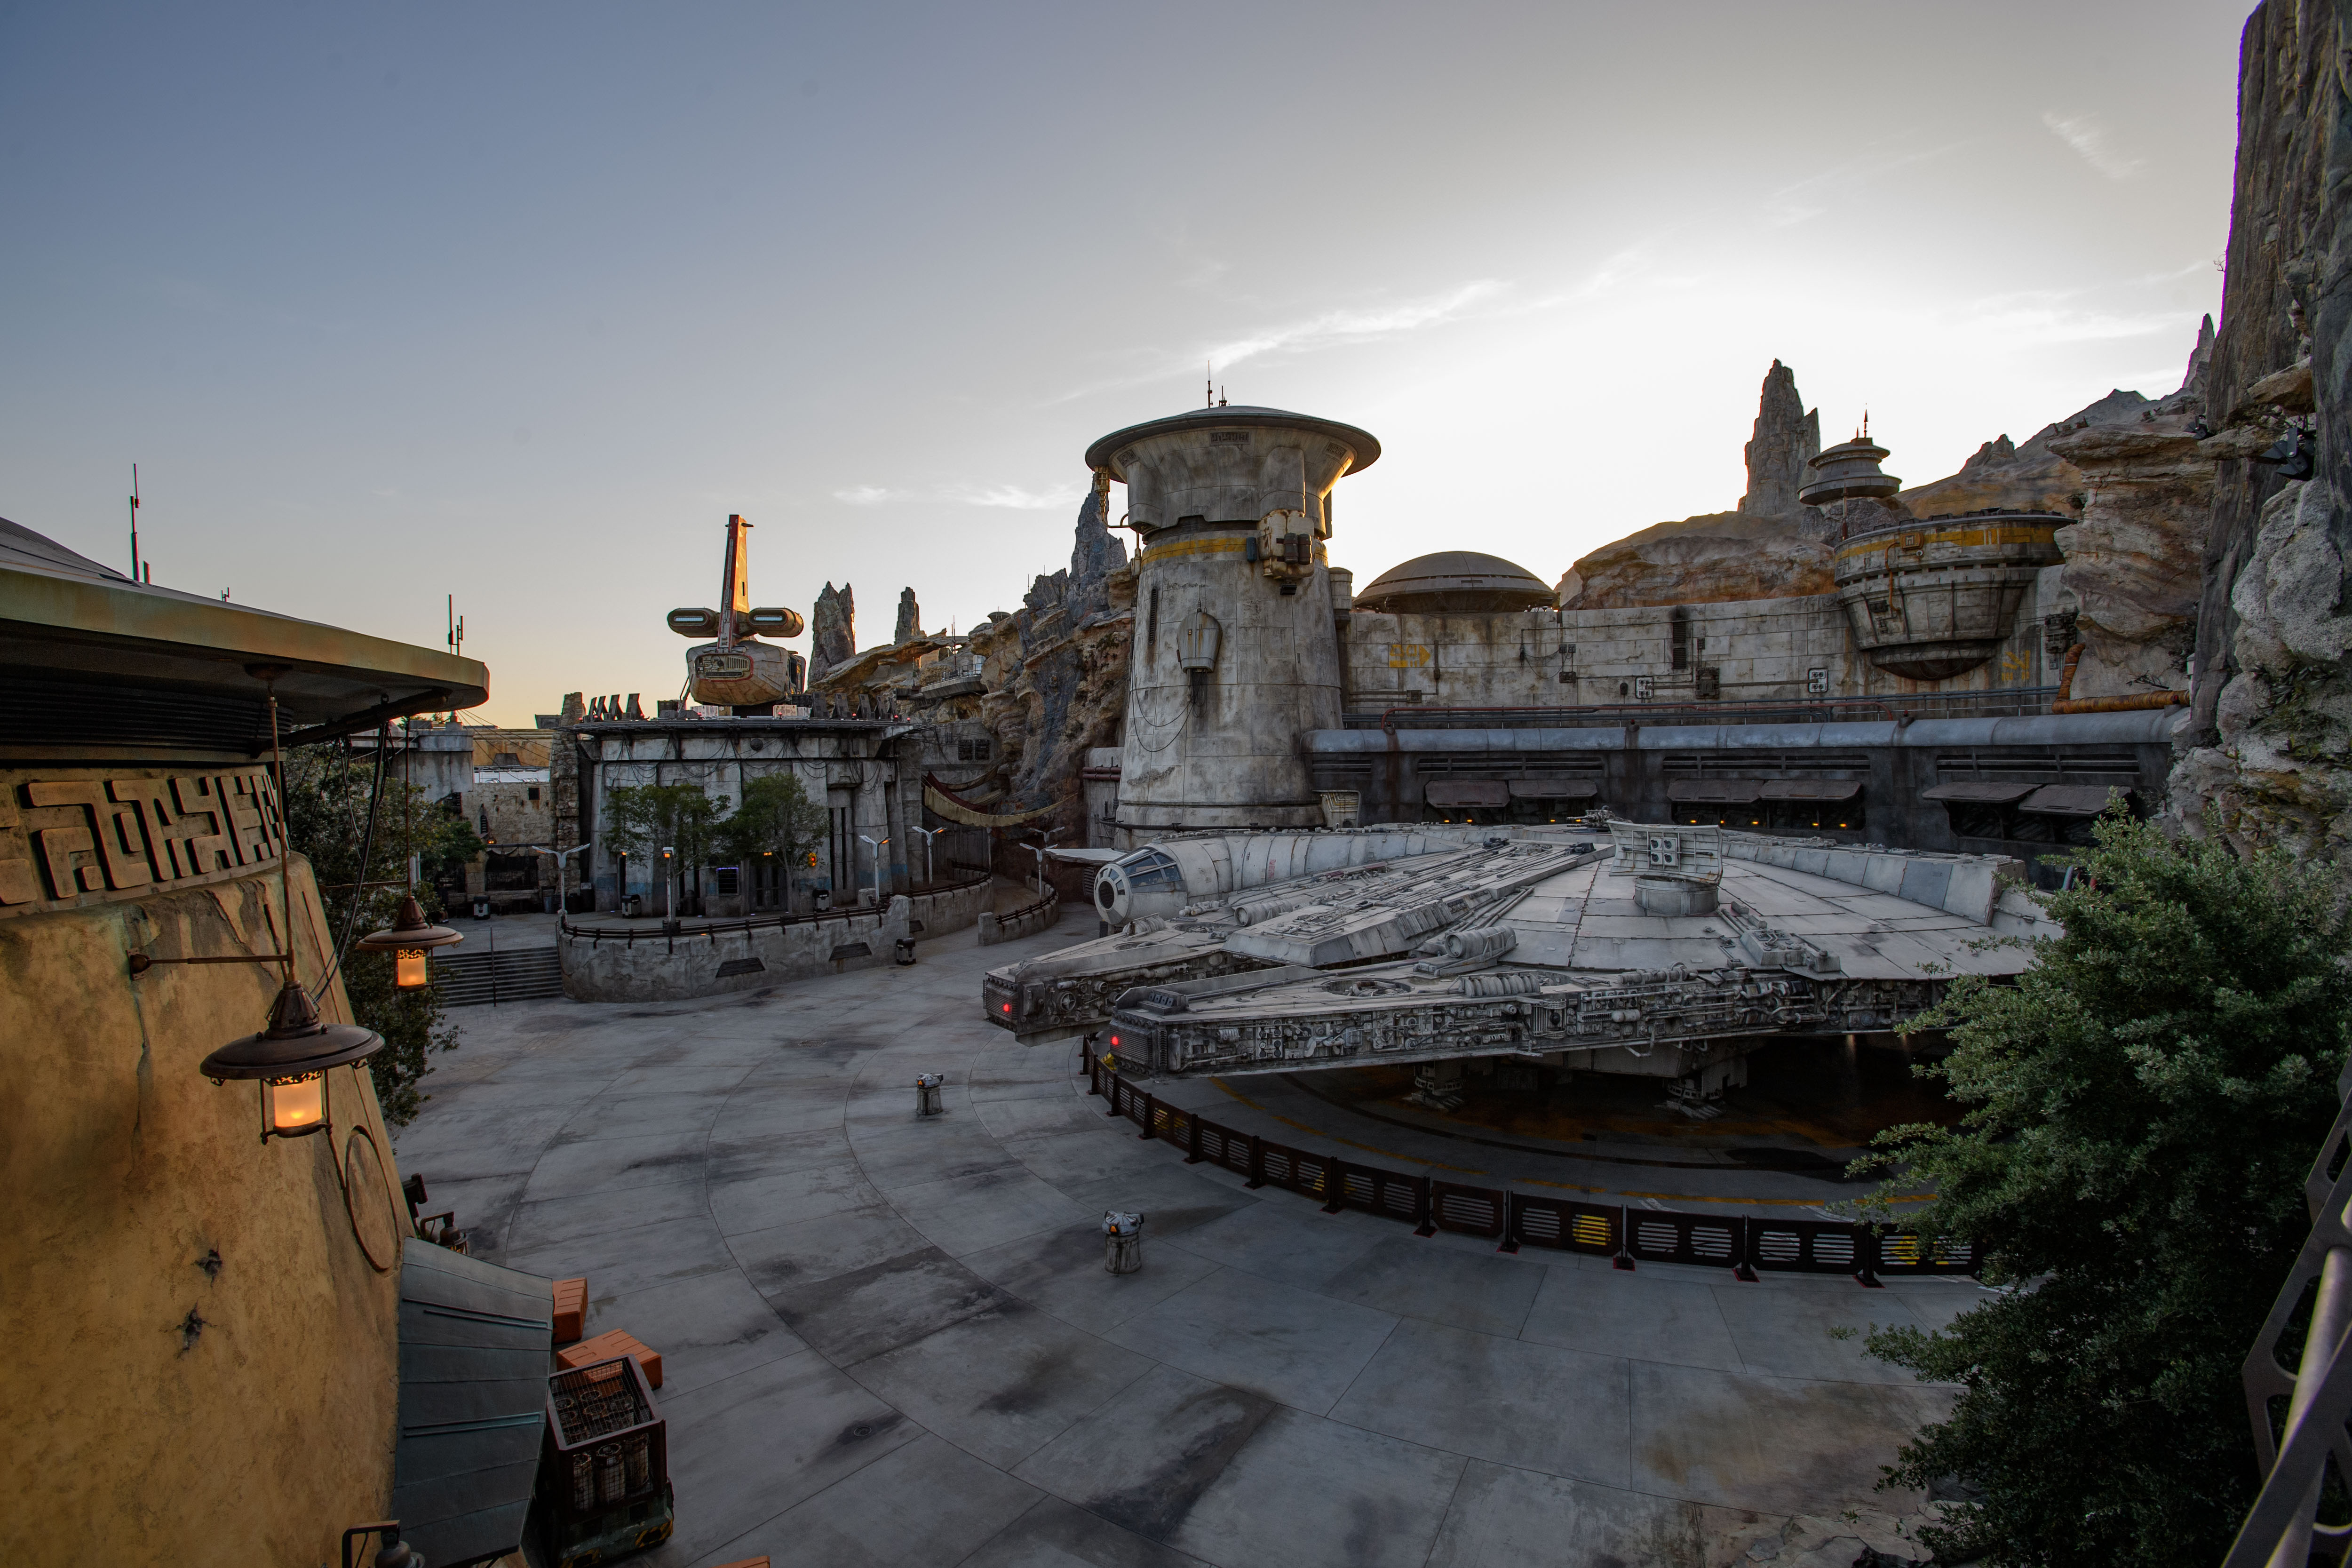 Take a look at the stunning virtual tour, including an up close and personal view of the Millennium Falcon. Photo courtesy of Disney!